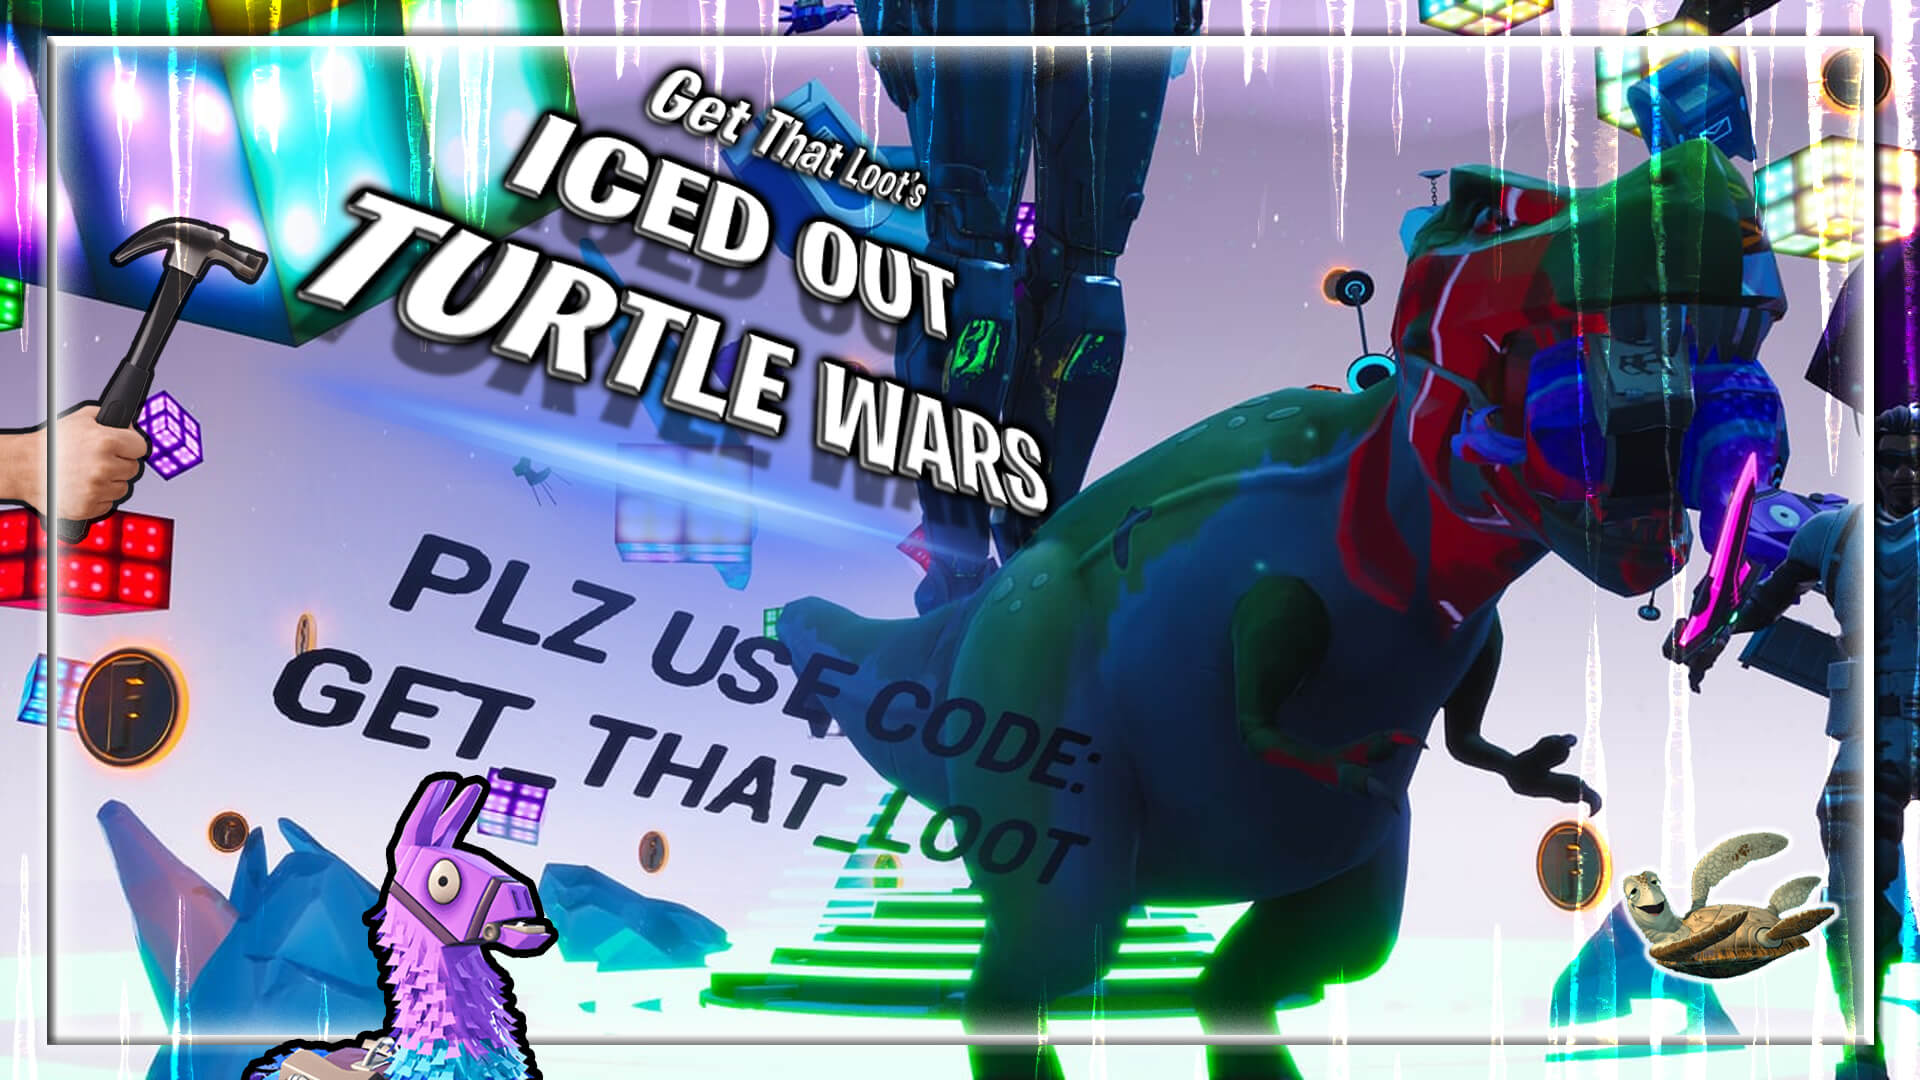 [ ICED OUT ] TURTLE WARS!